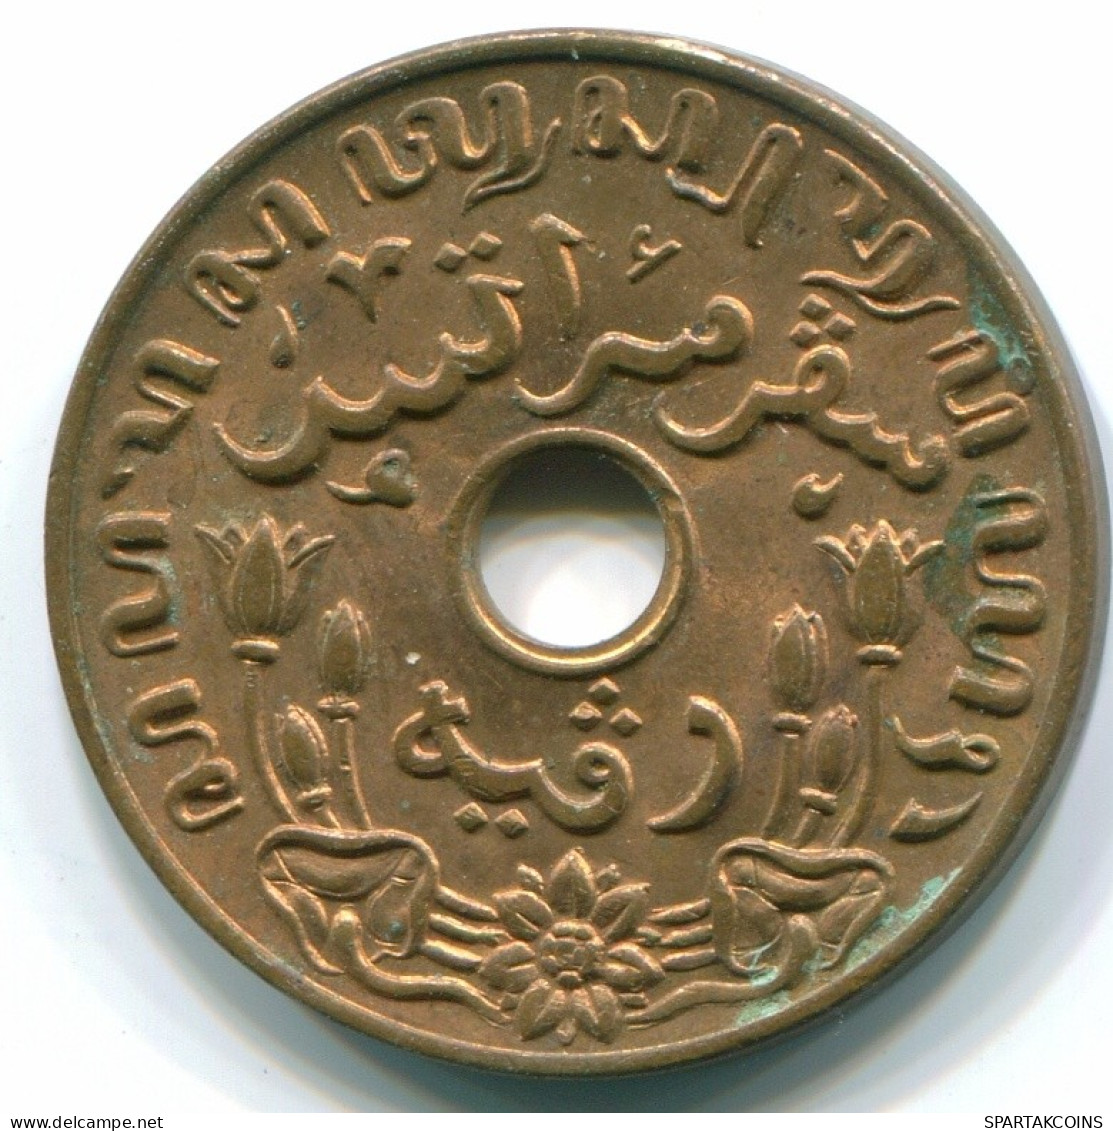 1 CENT 1945 D NETHERLANDS EAST INDIES INDONESIA Bronze Colonial Coin #S10431.U.A - Indes Neerlandesas